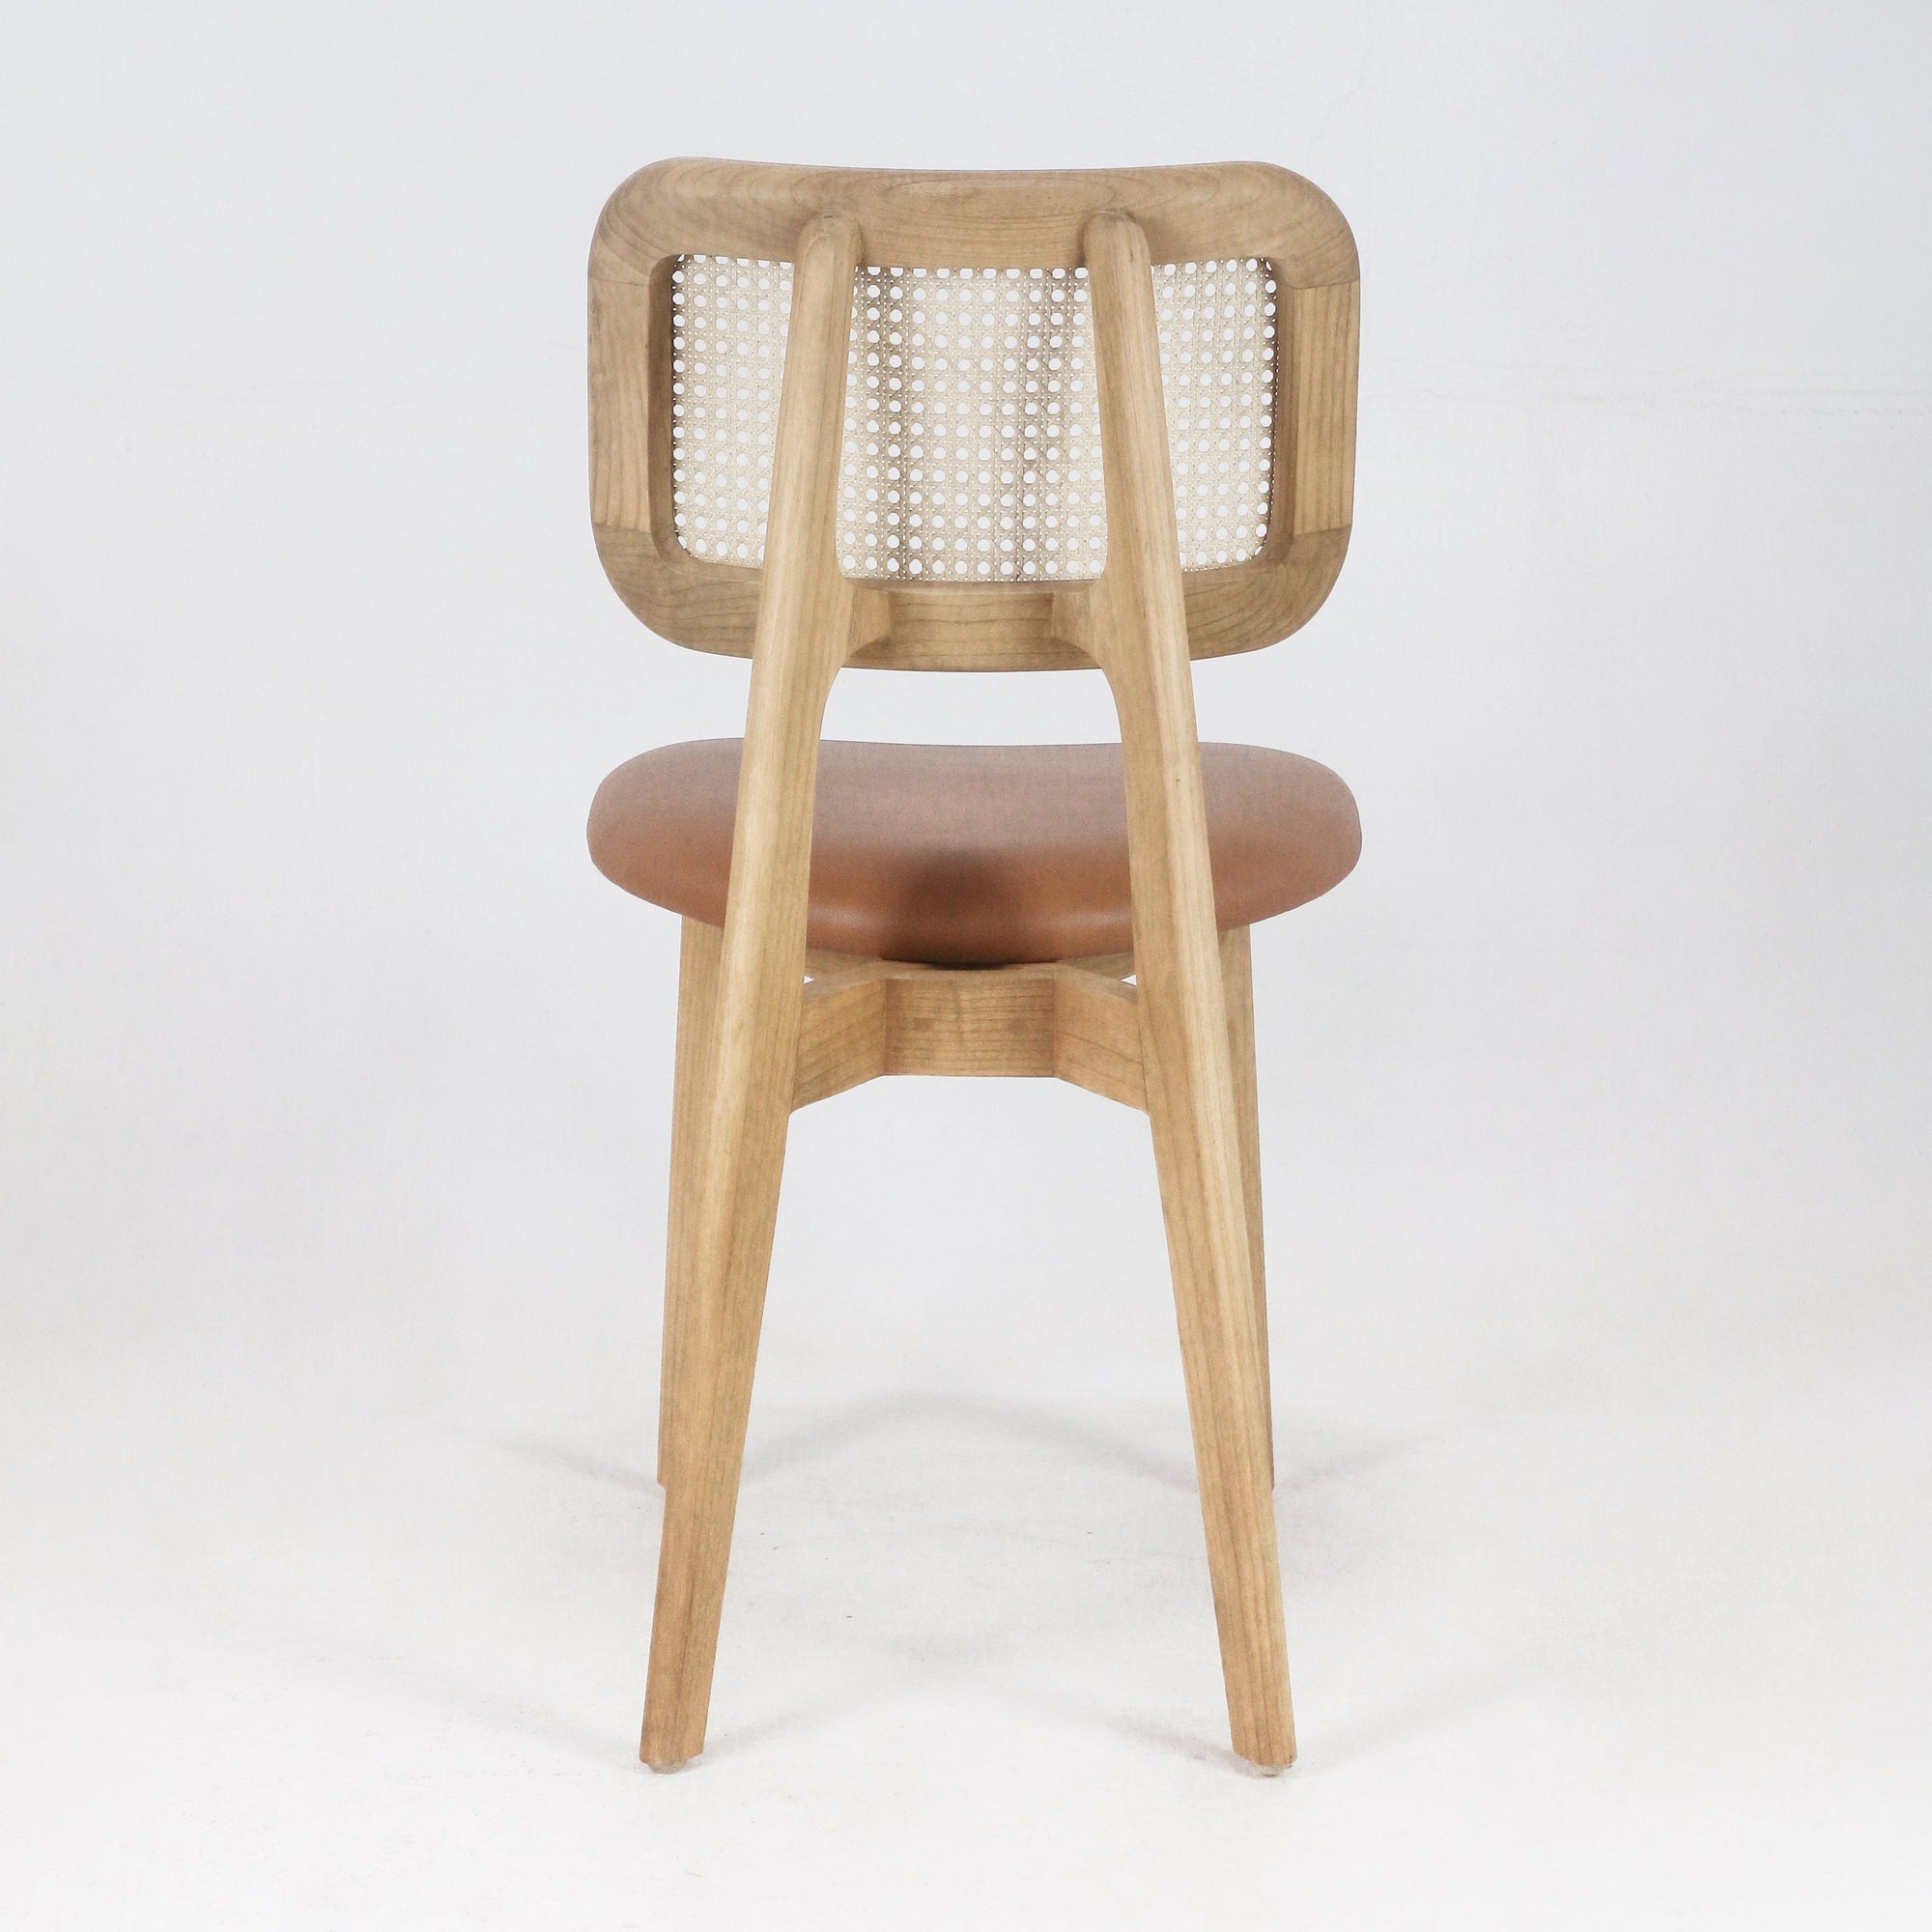 Abode Dining Chair with Rattan Backrest with Tan Leather Seat - INTERIORTONIC